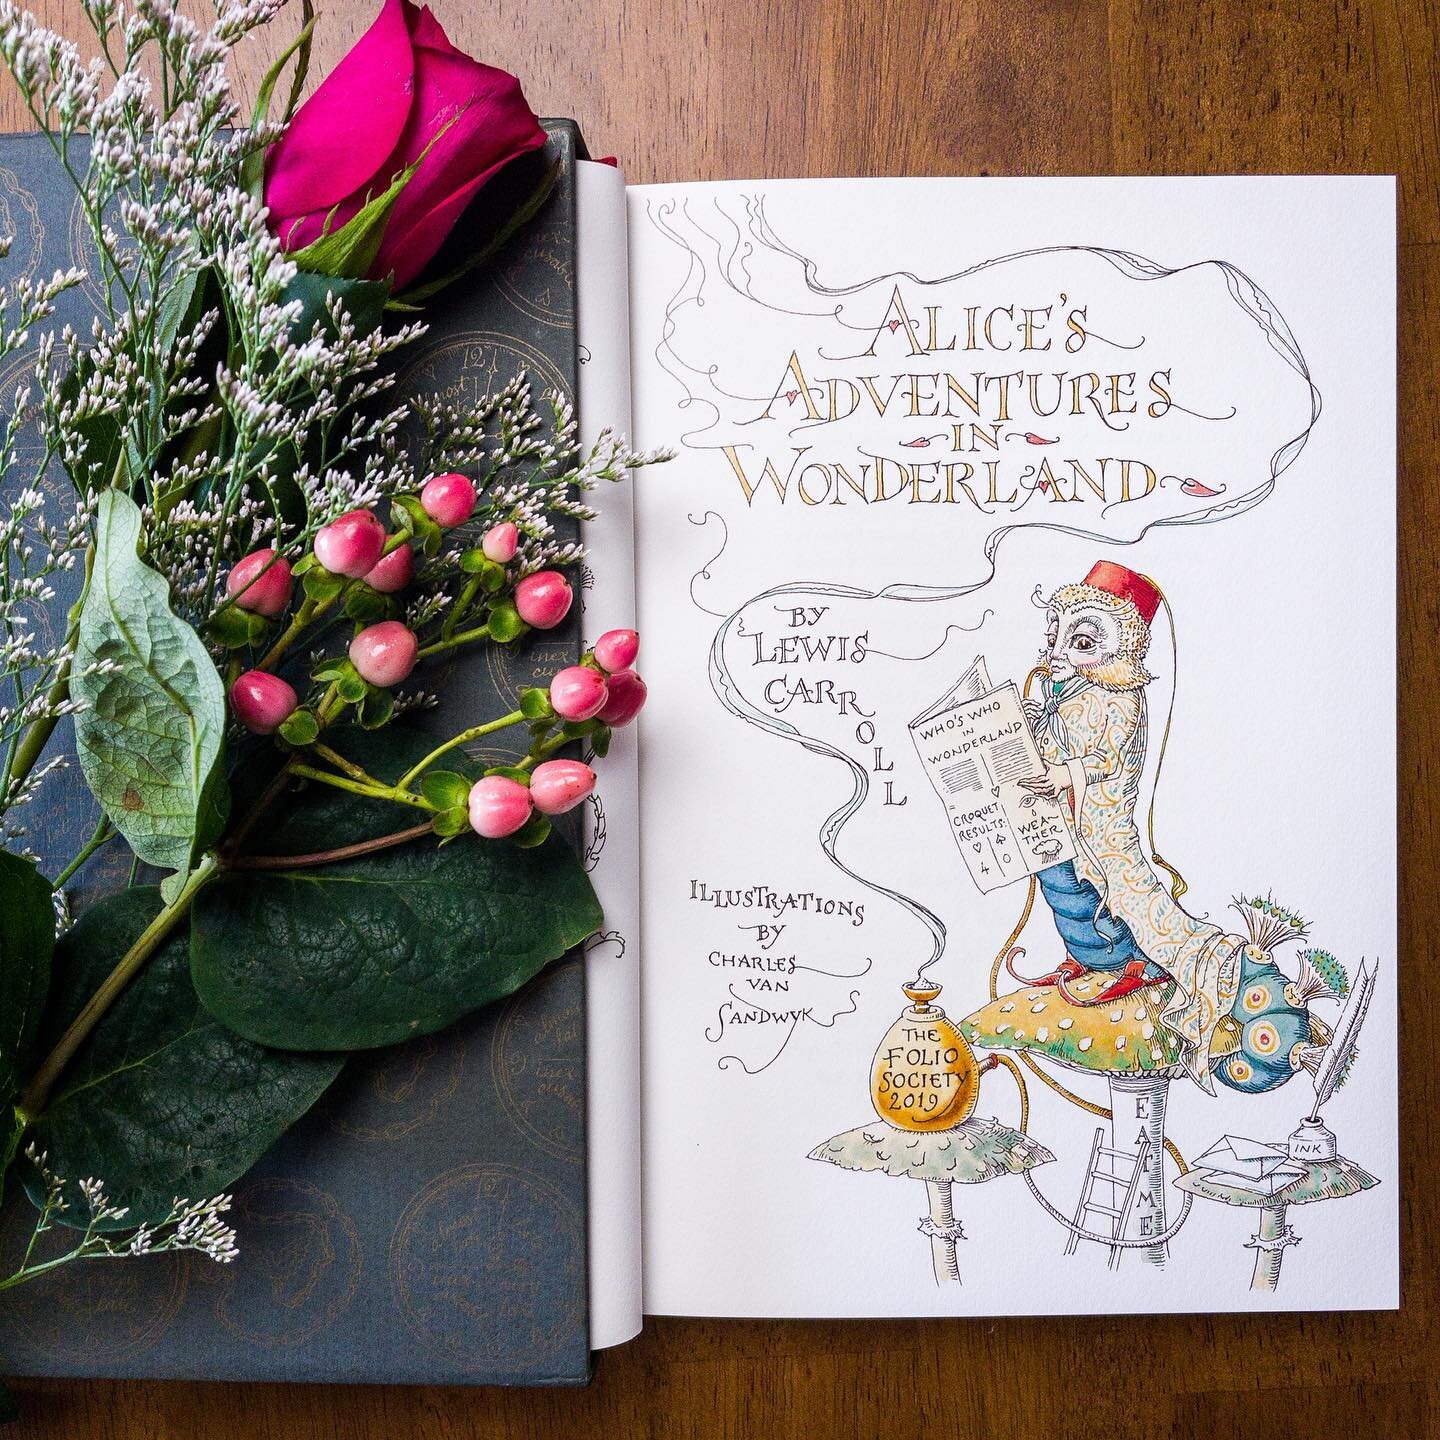 We can&rsquo;t wait to read Alice&rsquo;s Adventures in Wonderland with our young nephew and share the magic of books with him! 

This @foliosociety edition with be particularly special to read with the kiddos in our life, and with their children too